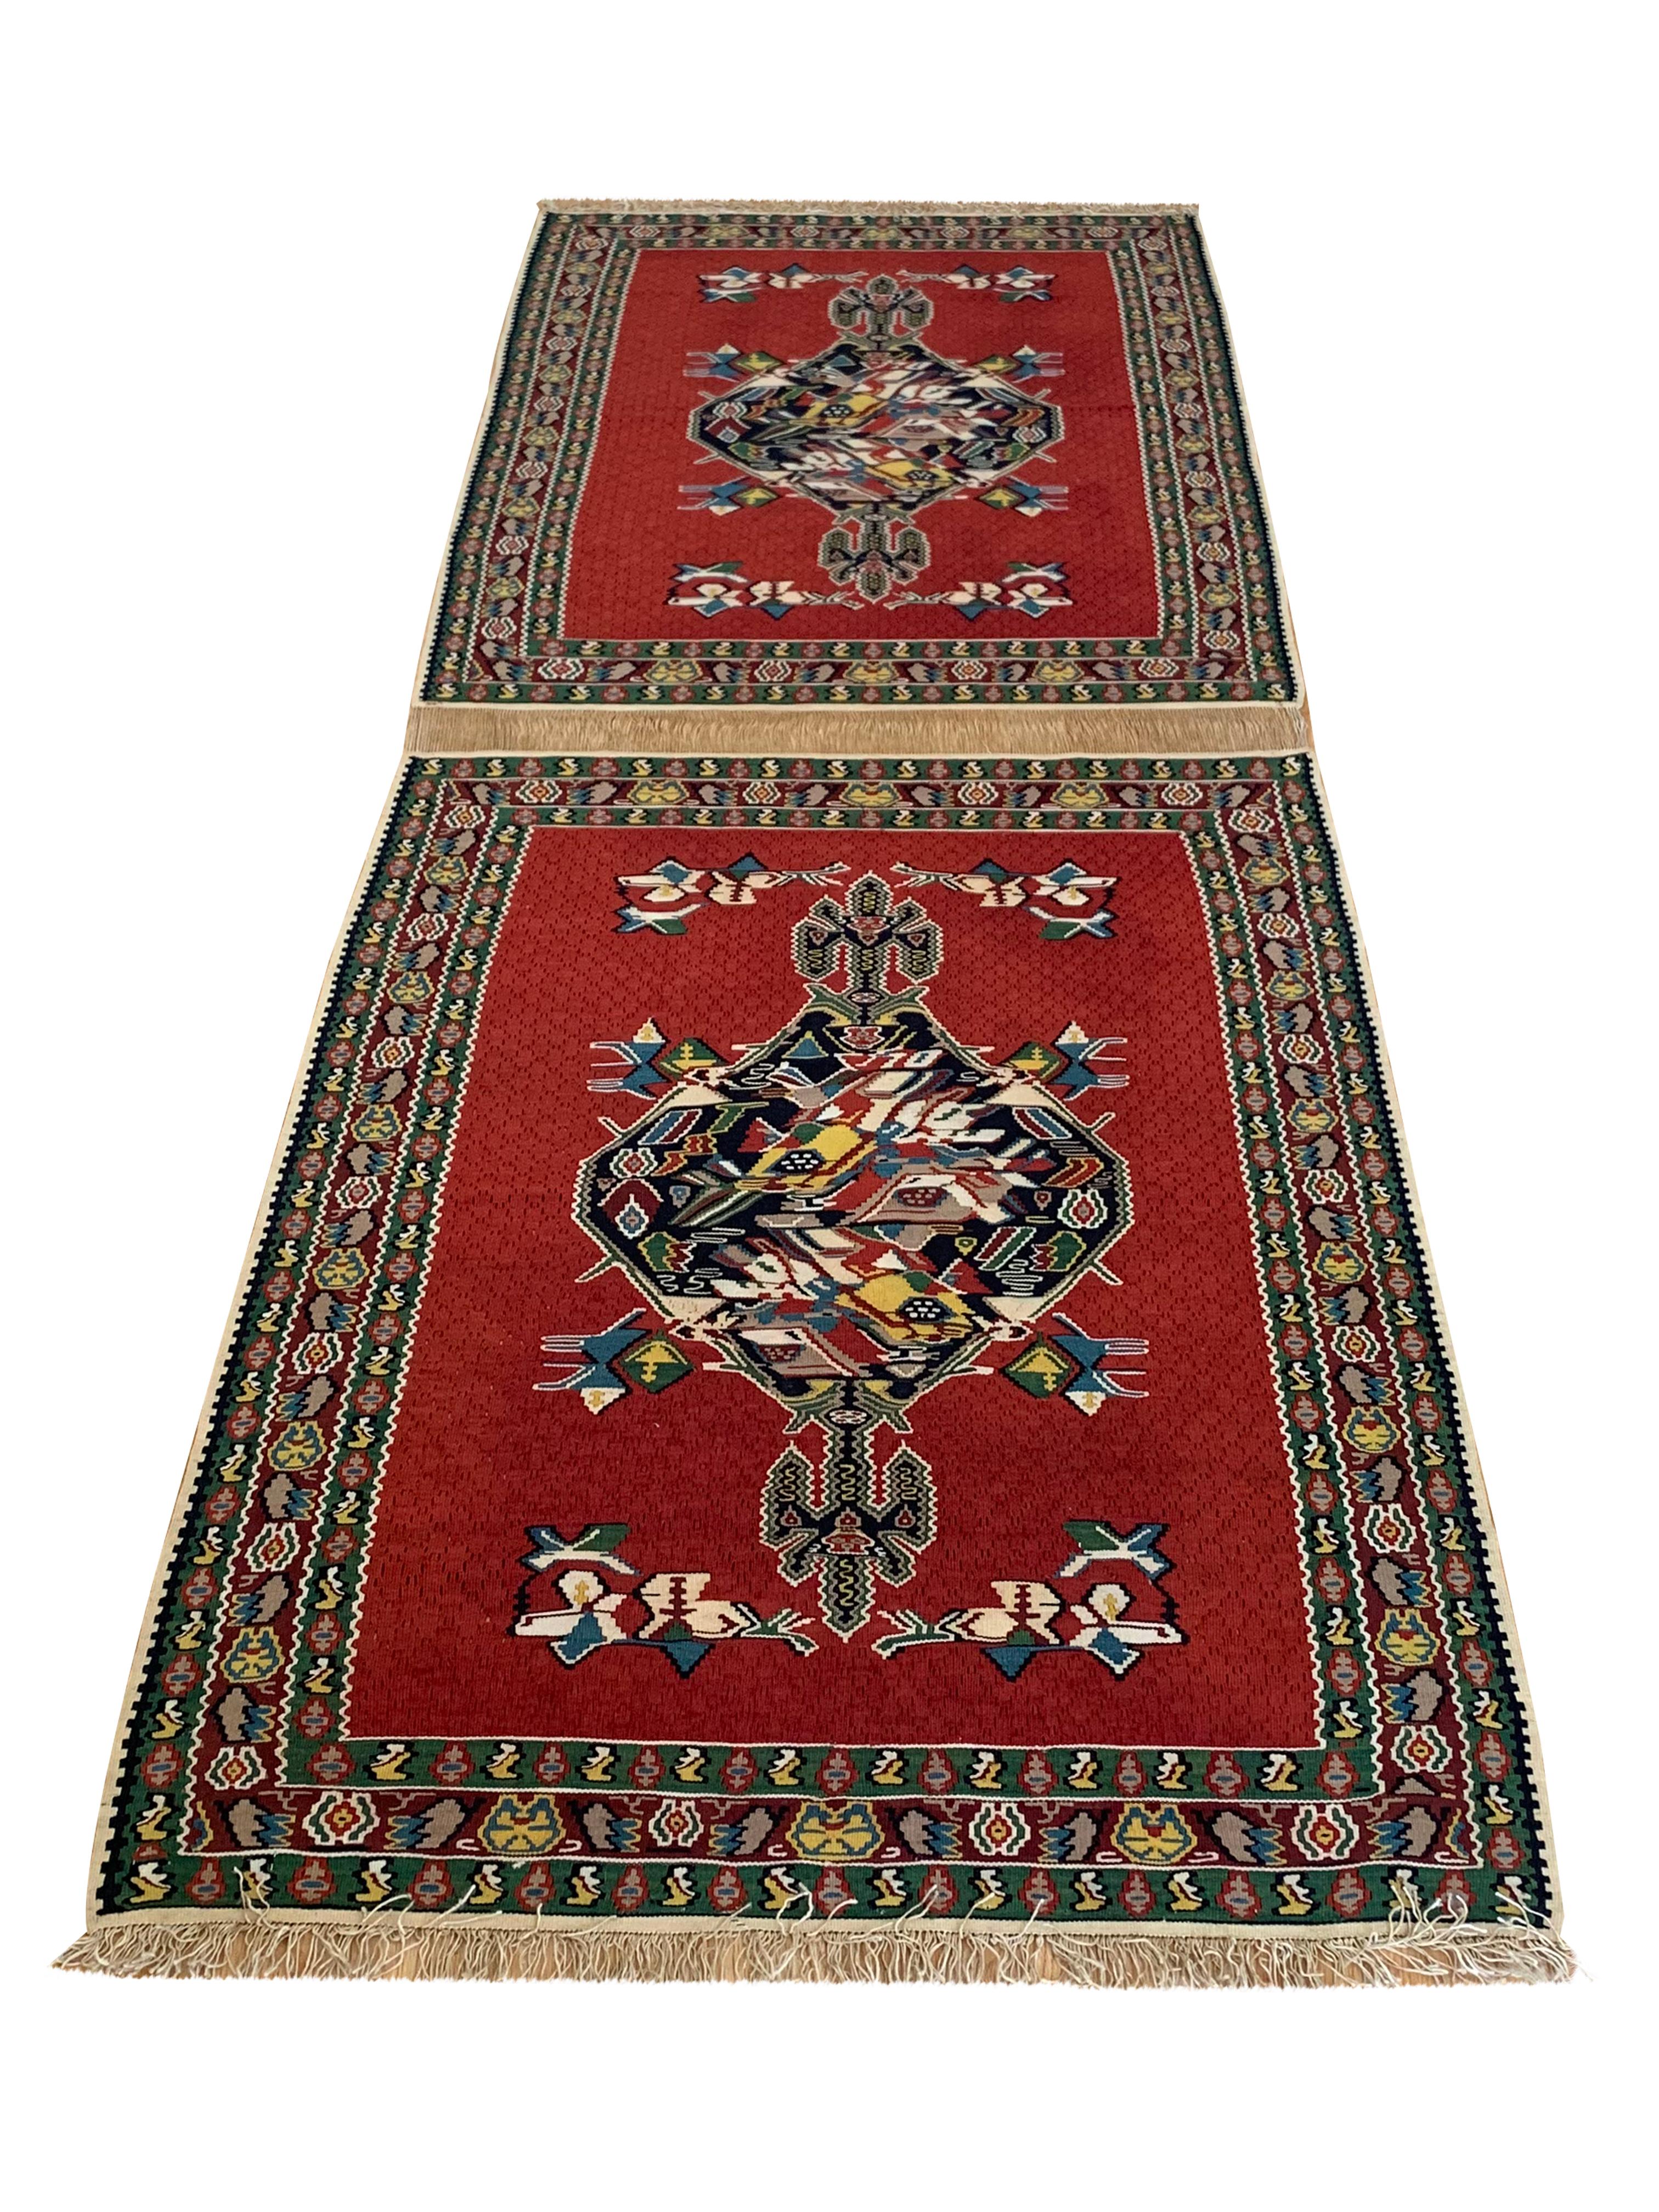 Pair of Red Silk and Wool Kilim Rugs Handmade Geometric Area Rugs For Sale 7